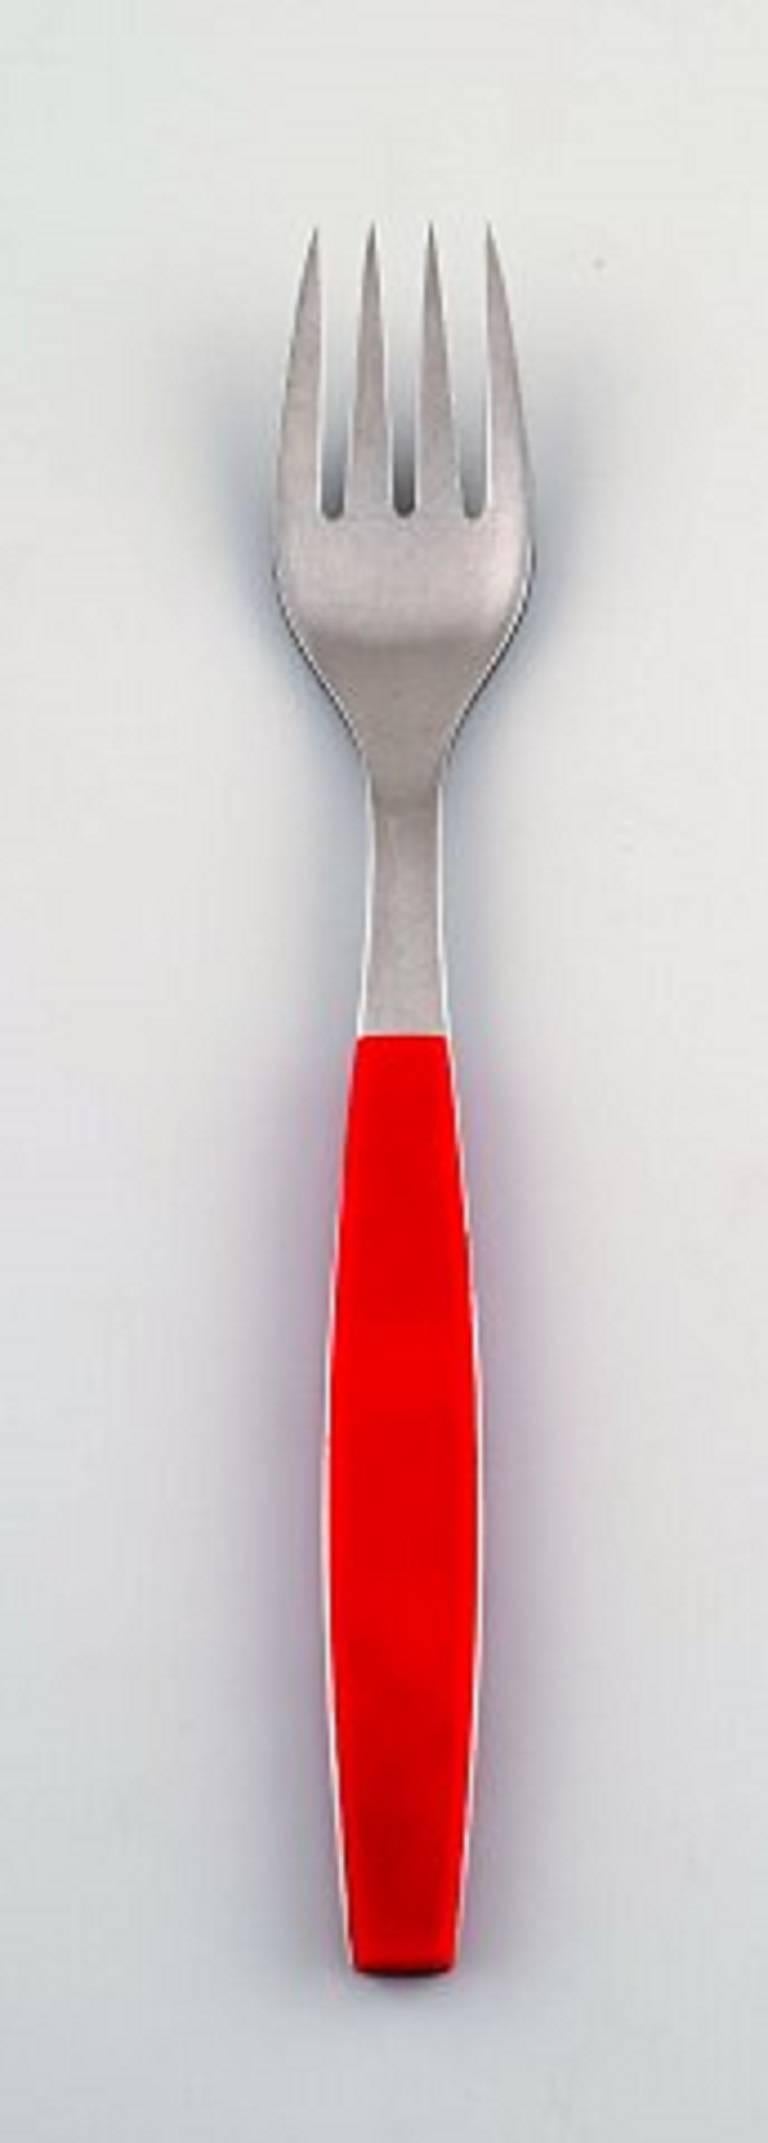 Complete service for six people, Henning Koppel. 

Strata cutlery in stainless steel and red plastic. 

Manufactured by Georg Jensen.

Consisting of: Six knives, six forks , six dessert spoons, six bouillon spoons.

In very good